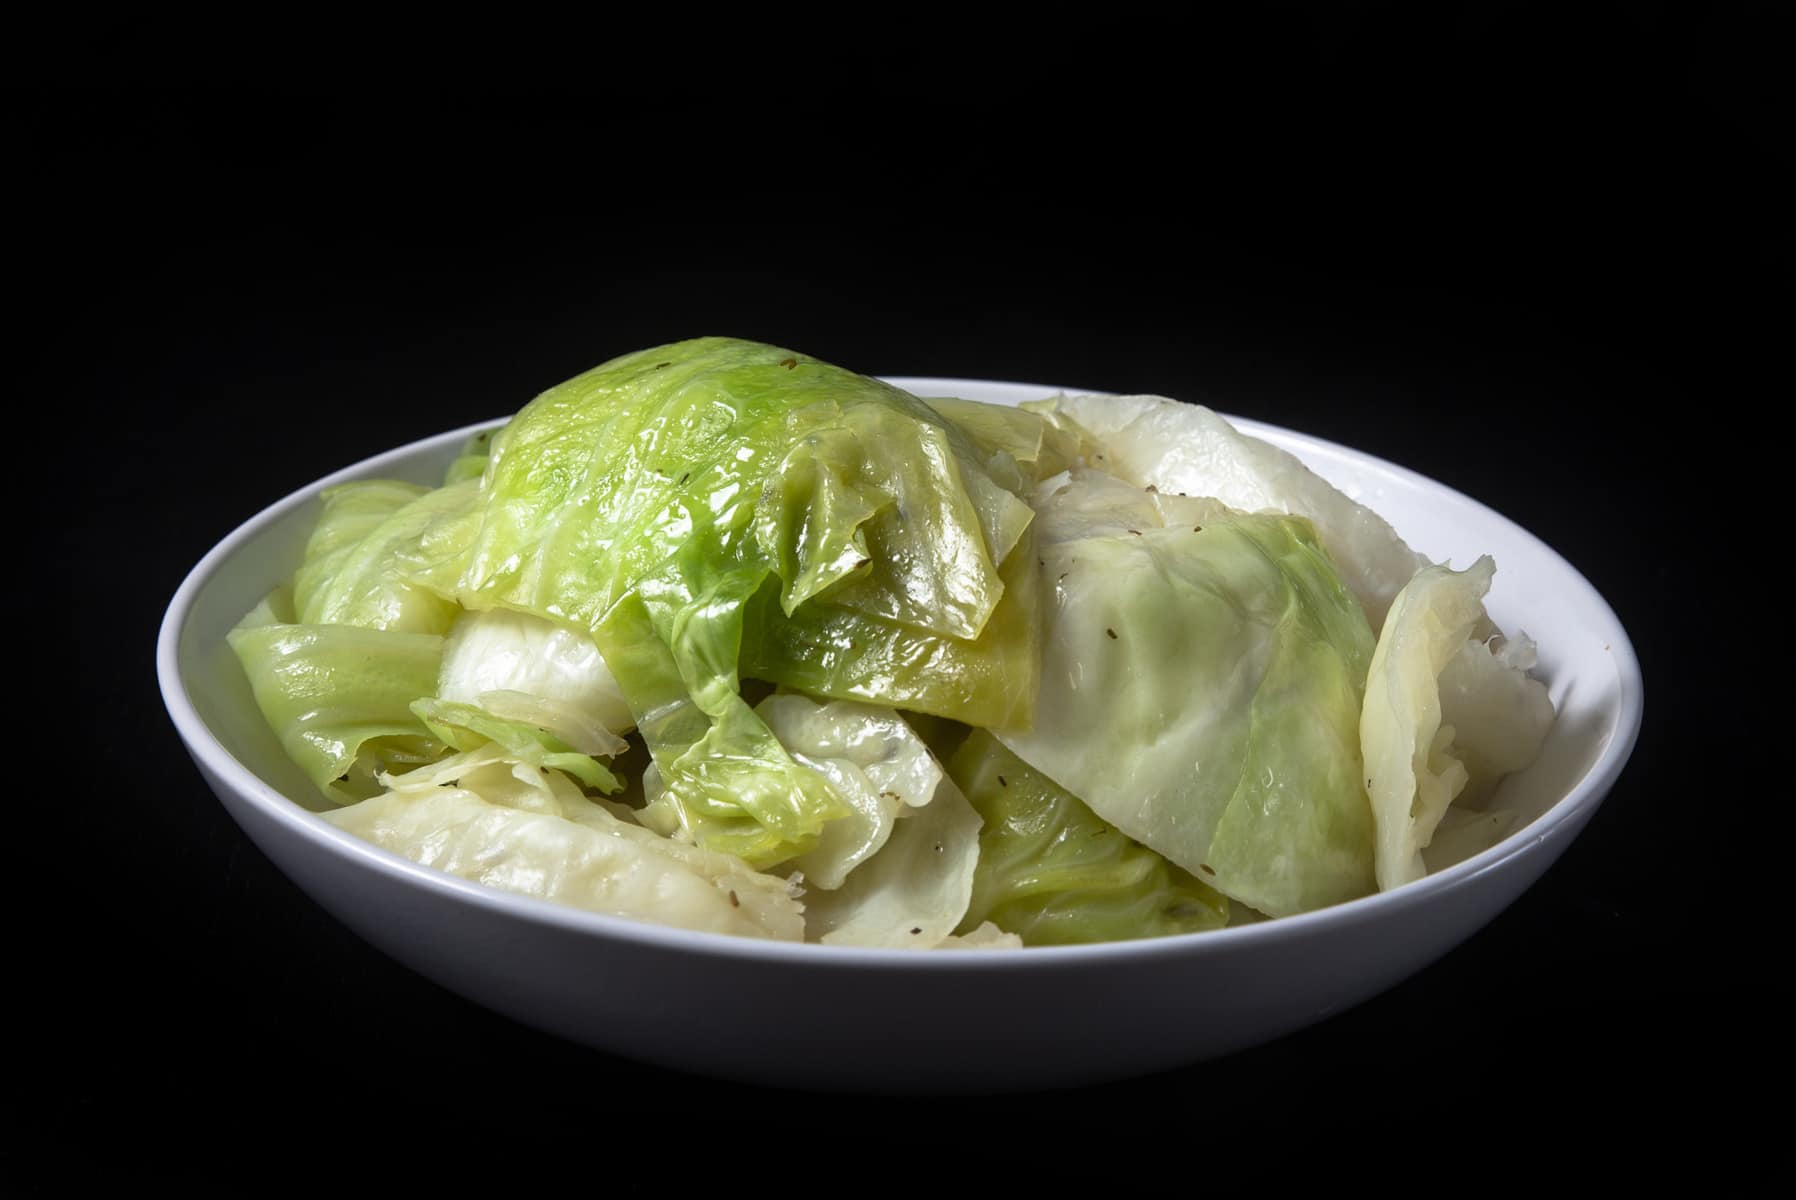 Instant Pot Cabbage Tested By Amy Jacky,Ikea Built In Bookshelf Hack